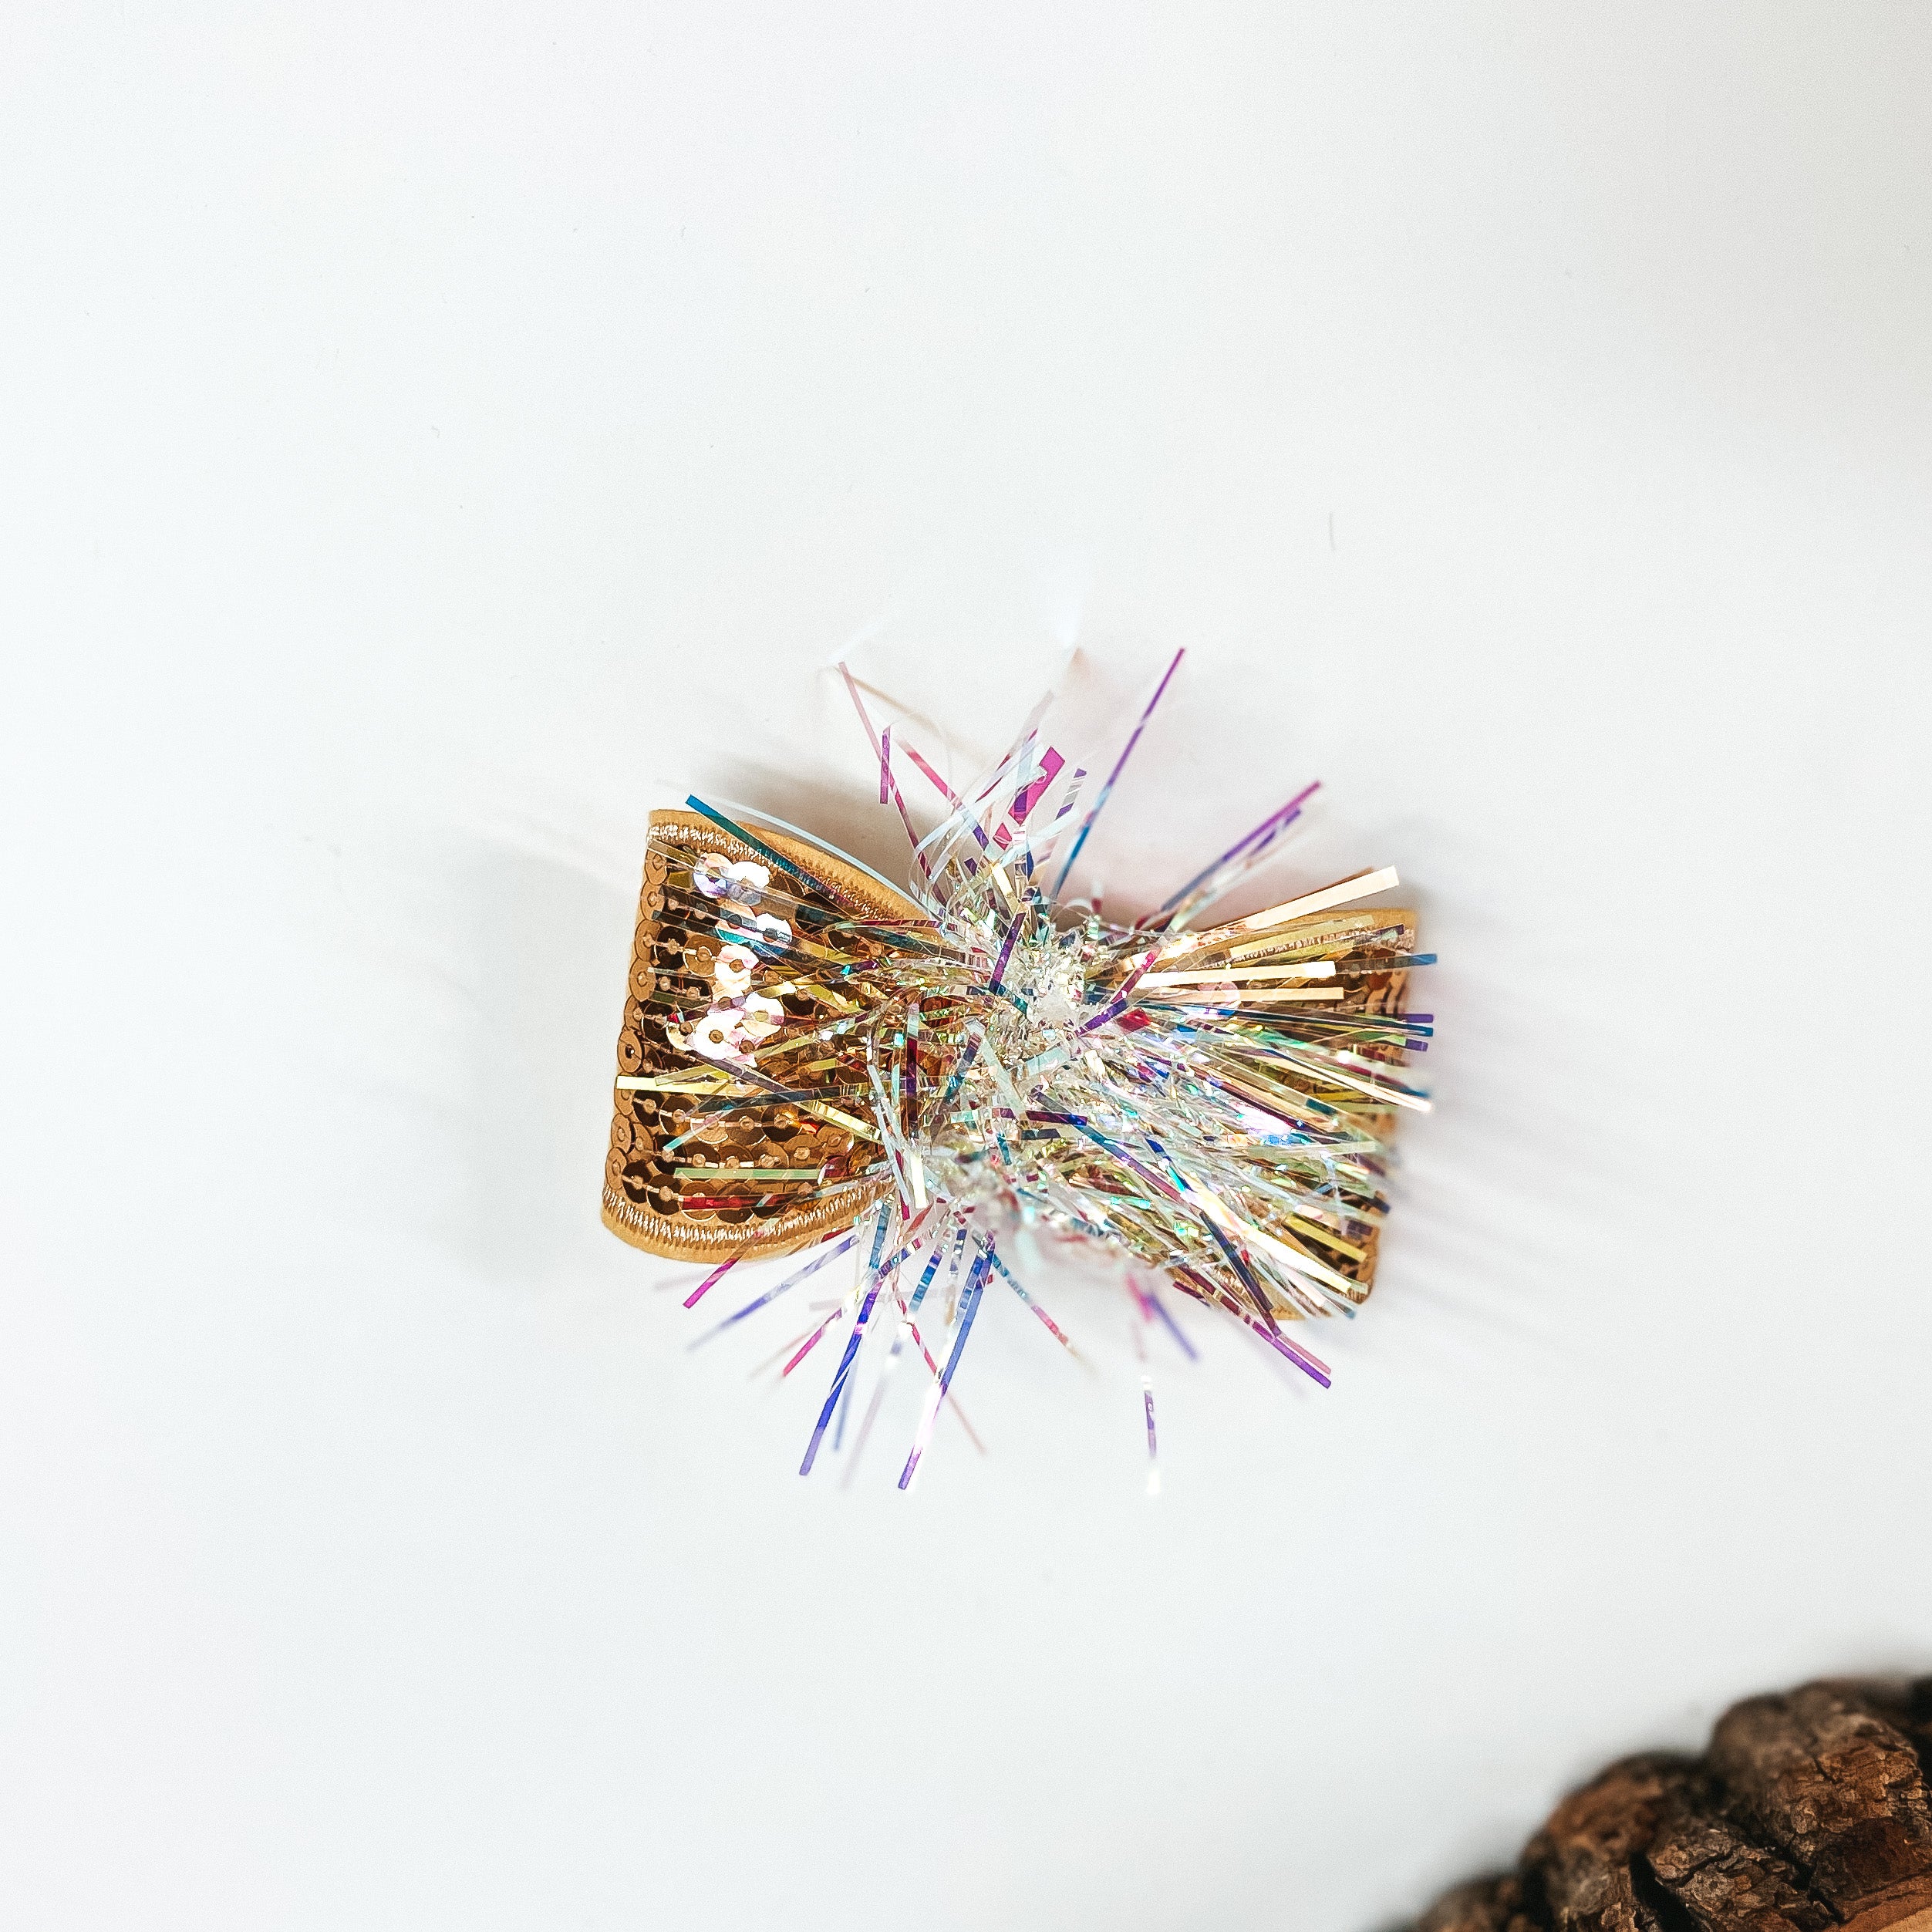 This is a small gold sequin bow with a tinsel center, this bow is taken on a  white background with a slab of wood in the corner as decor.